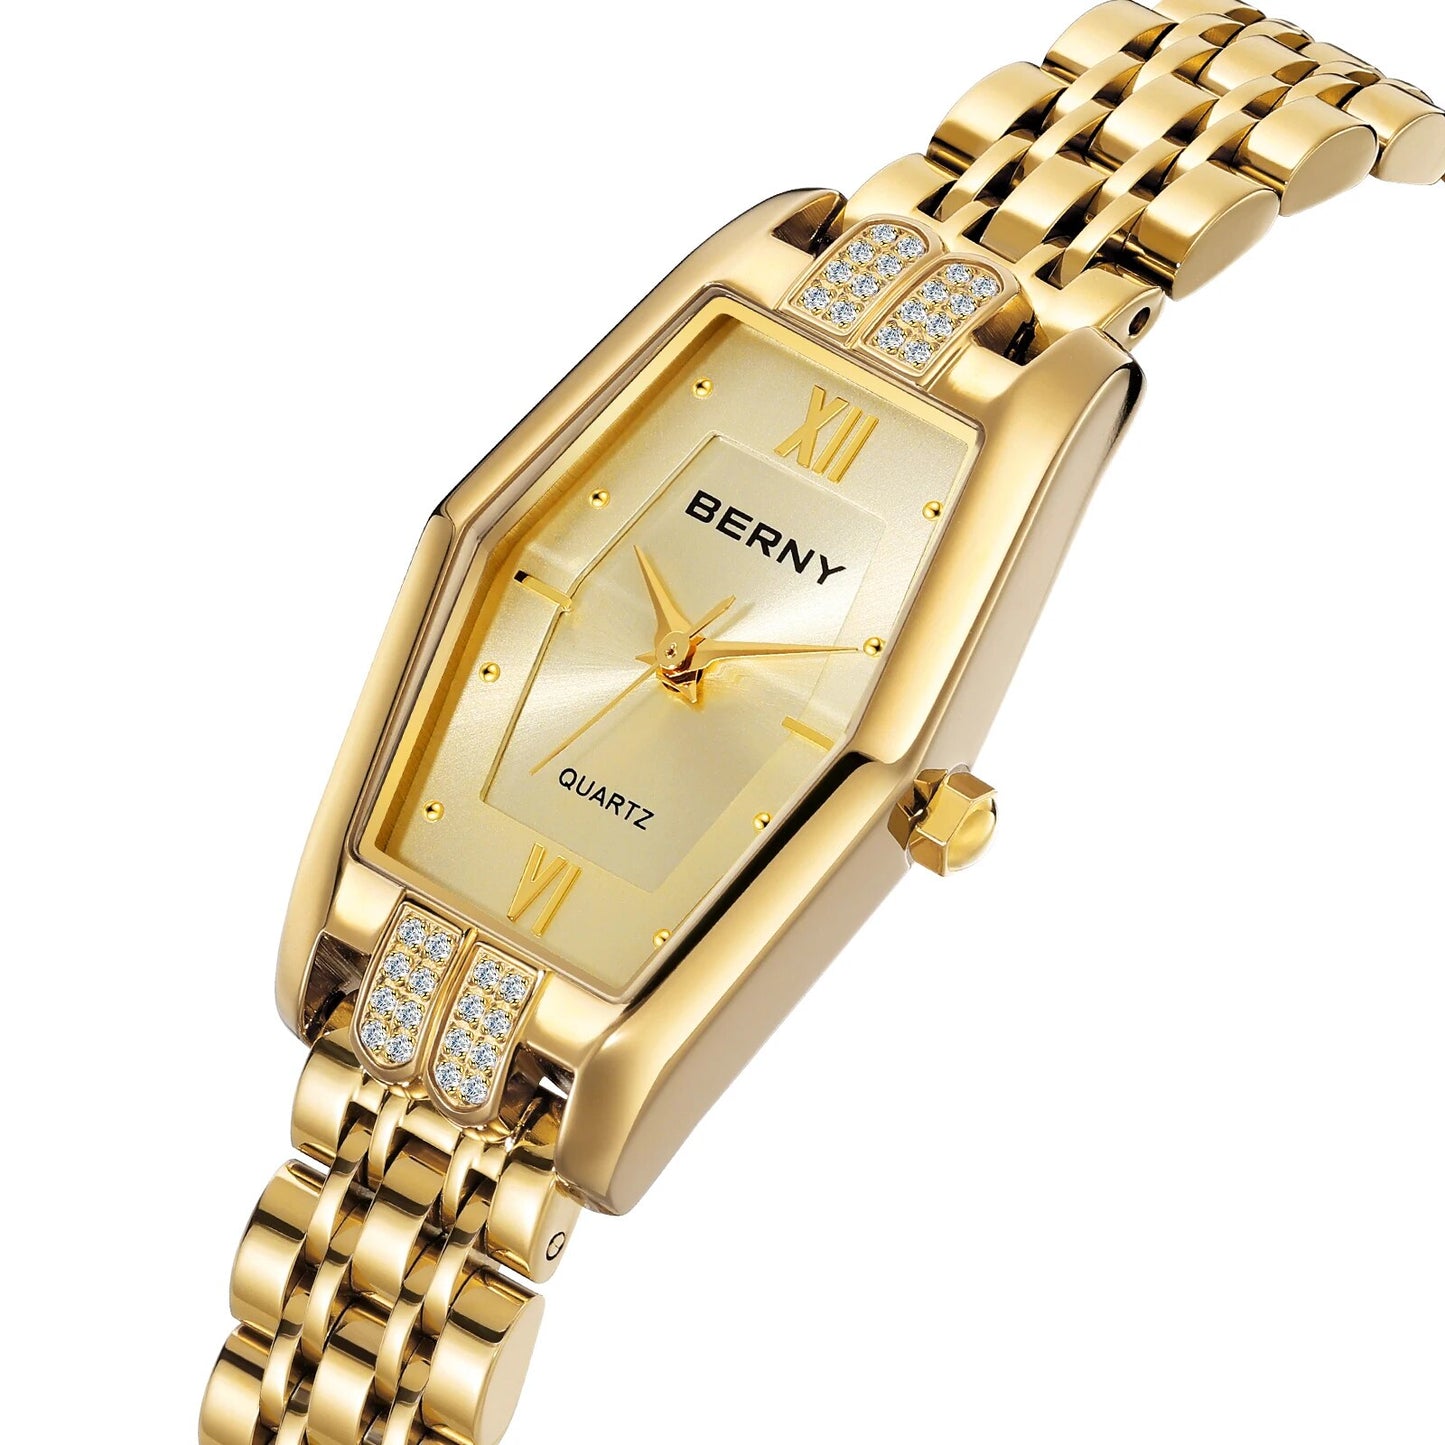 Berny Stunning watch available in multiple watch face colours